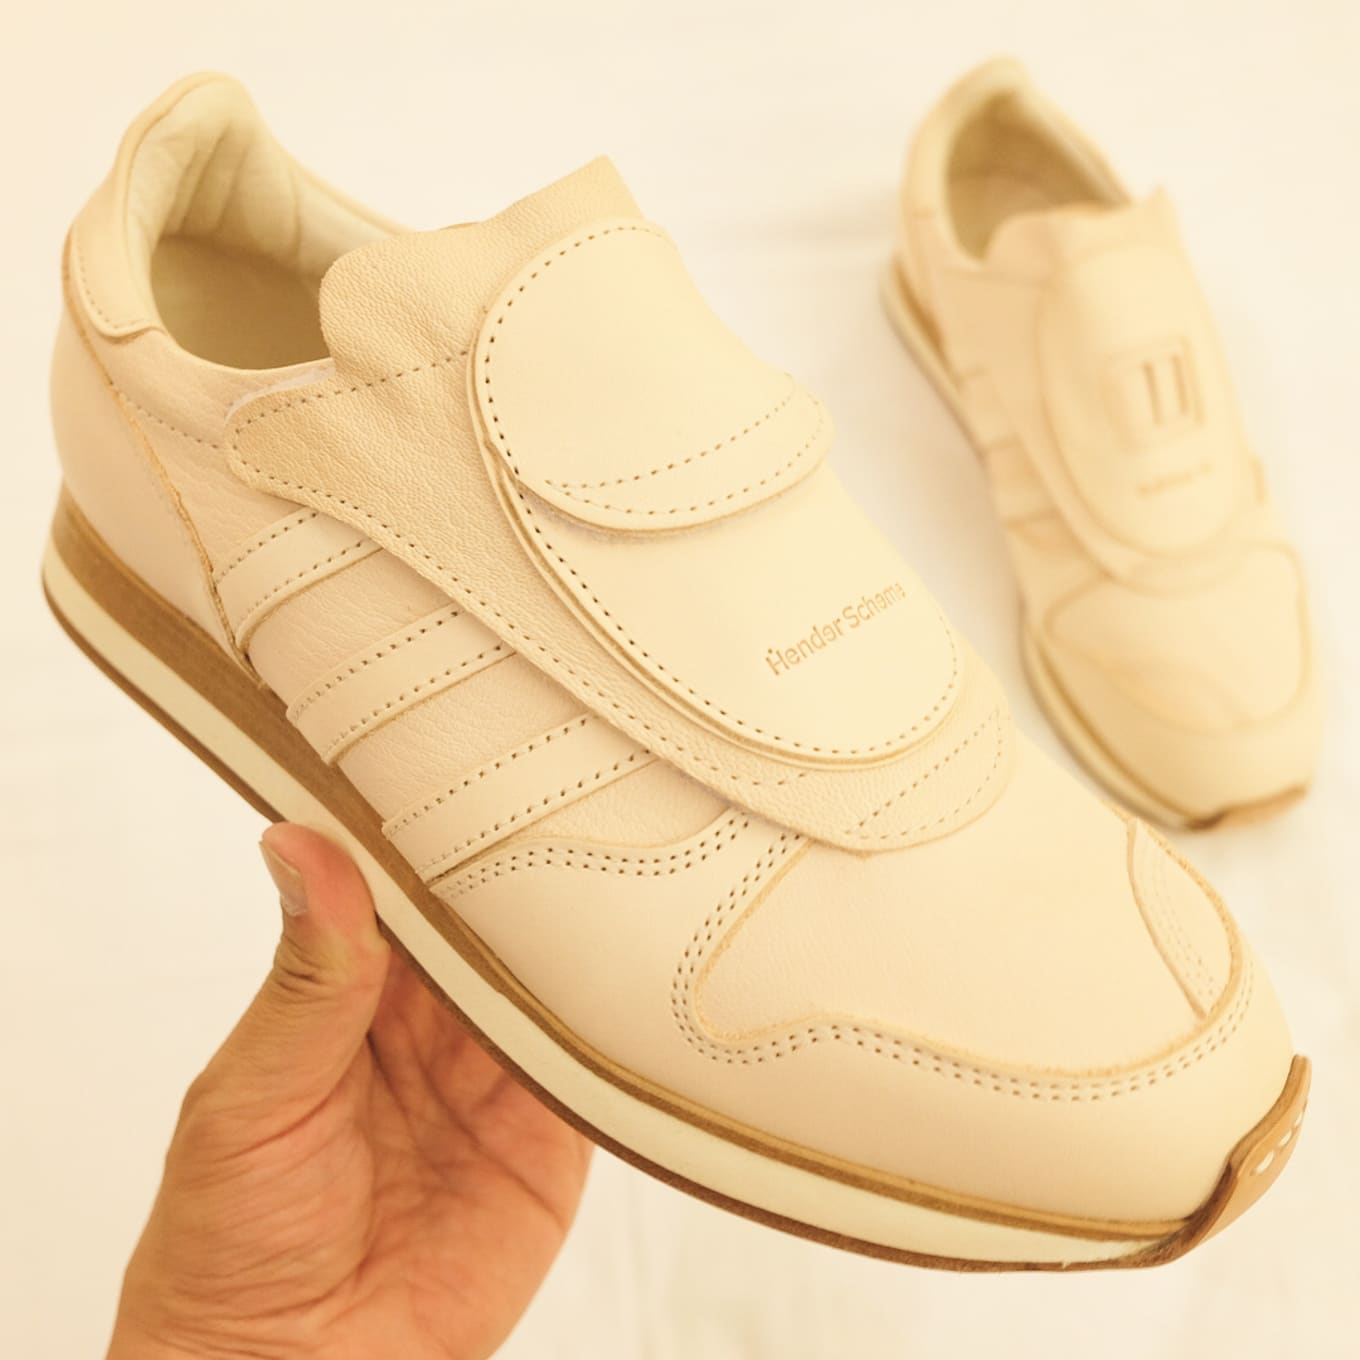 basic zone security Hender Scheme Adidas Micropacer | Sole Collector